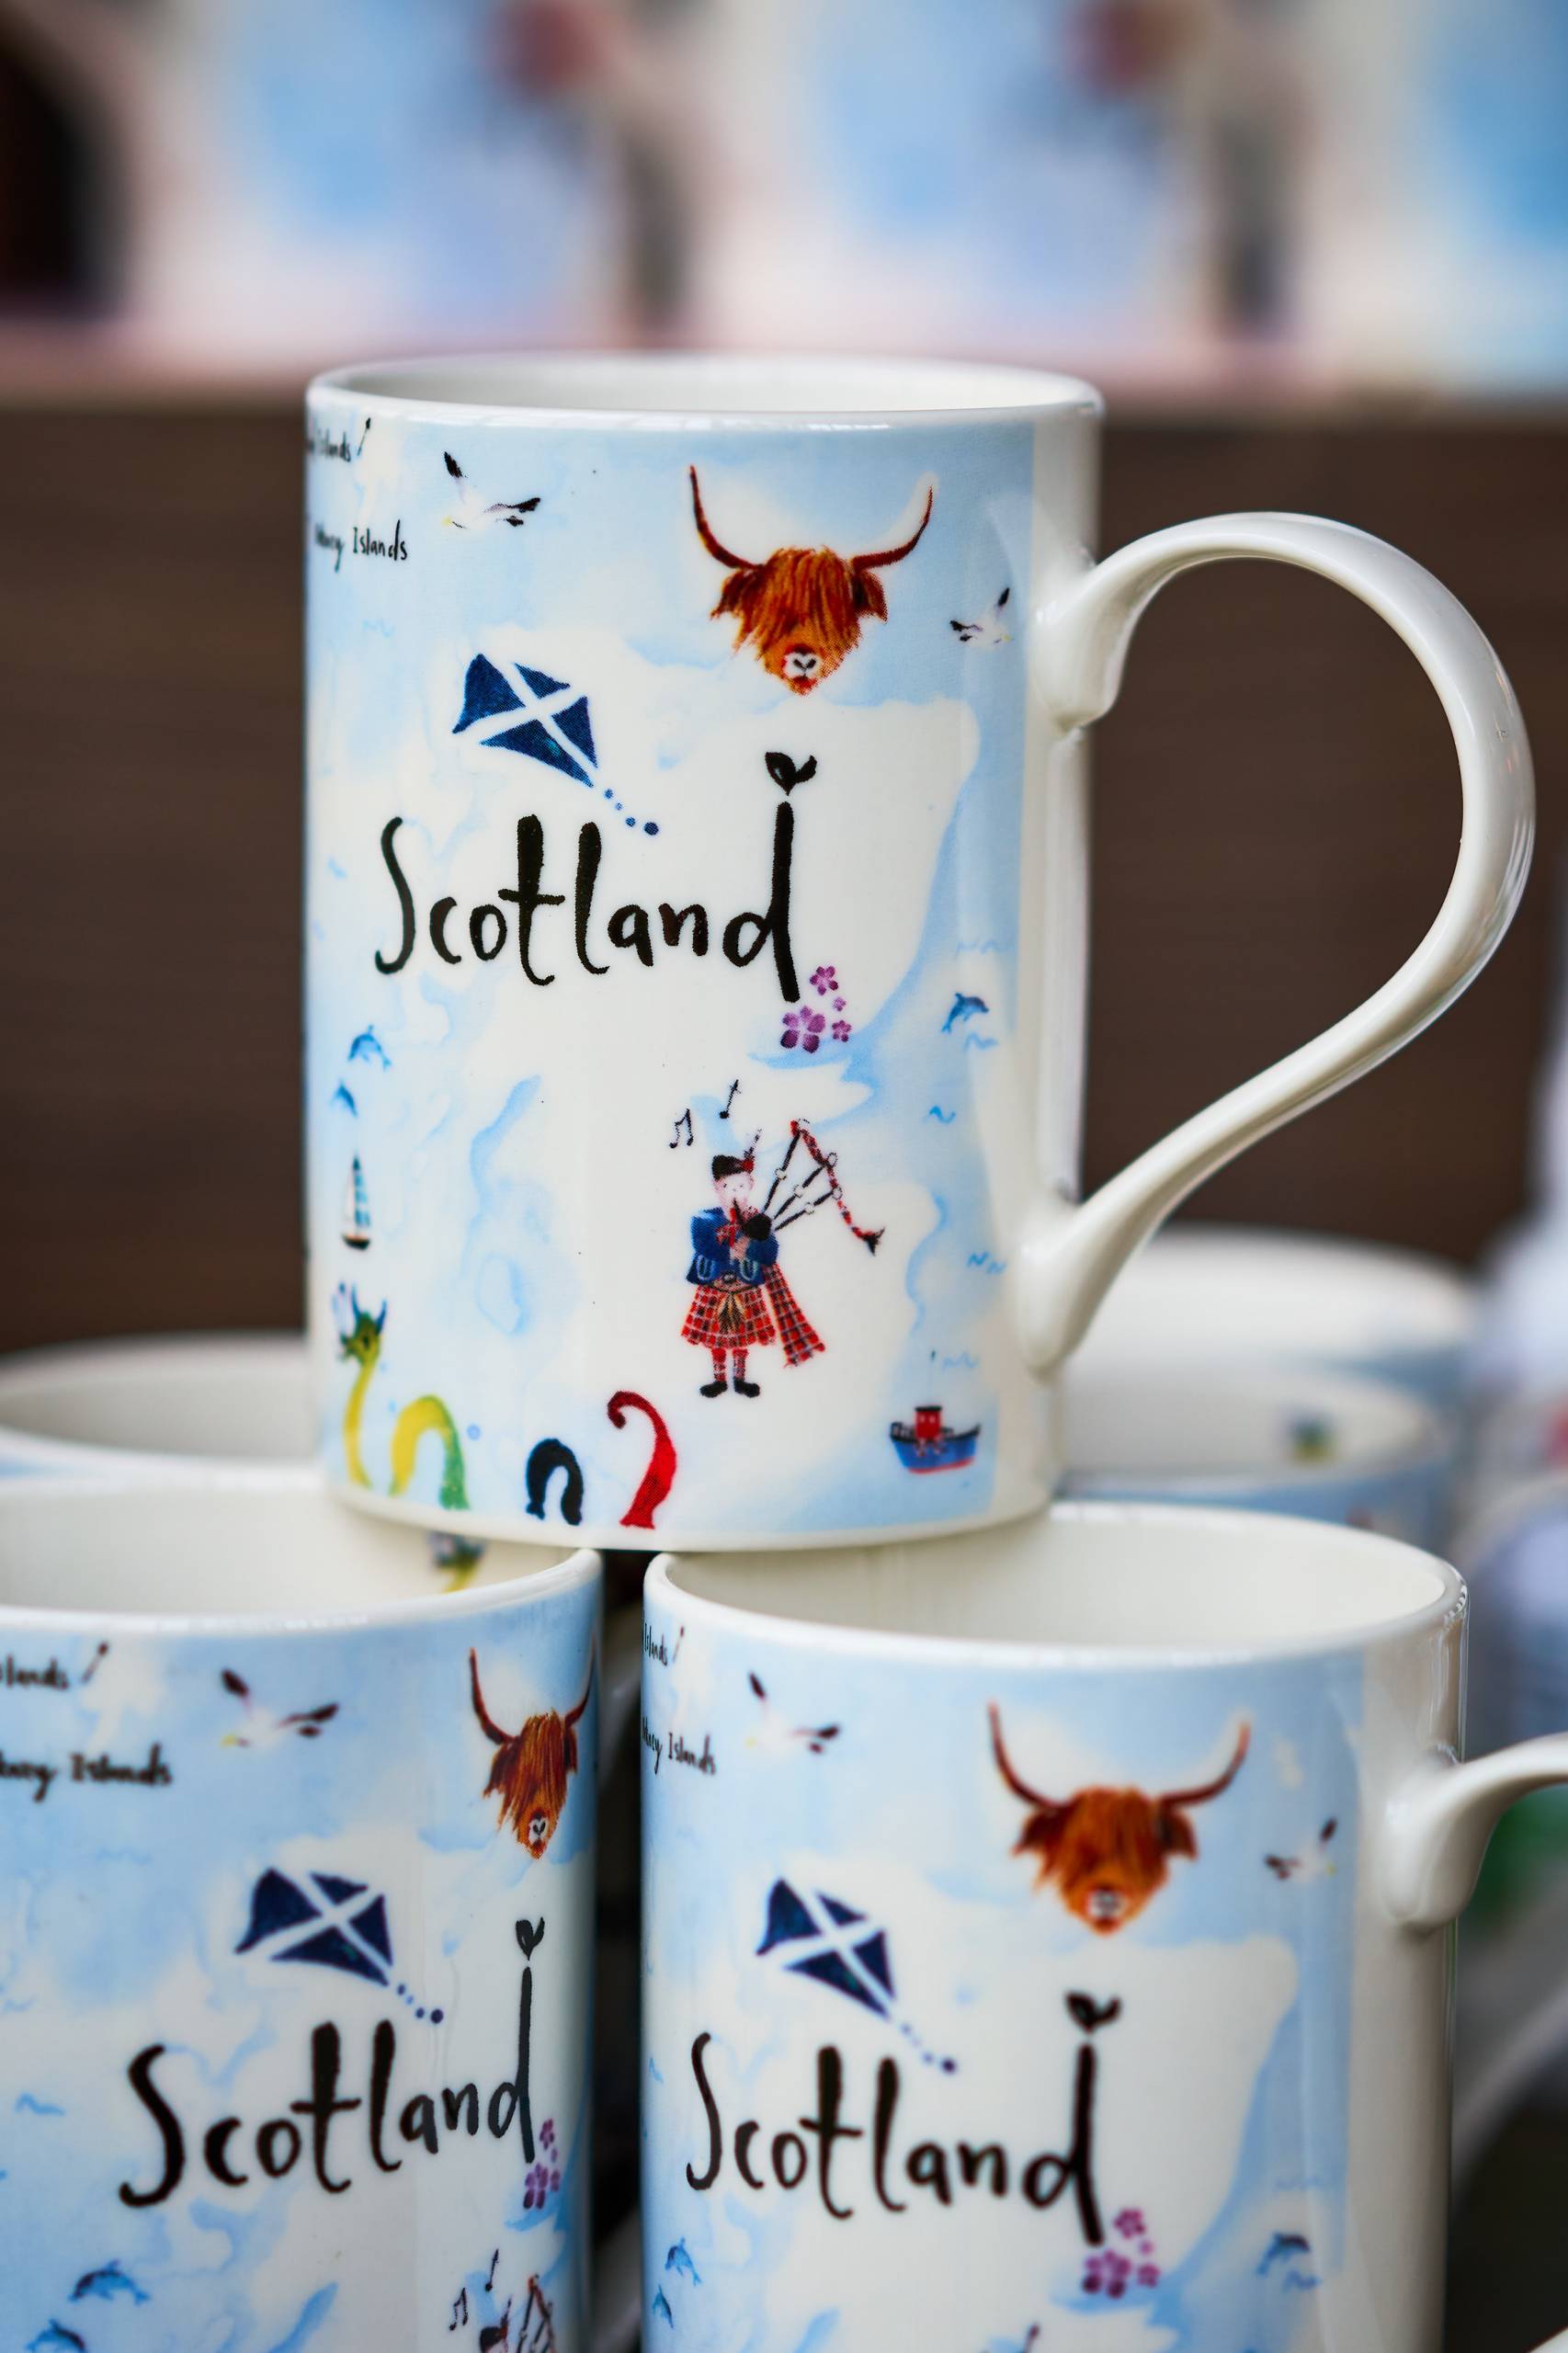 A coffee mug with the word 'Scotland' across it, the mug has a highland cow, someone playing the bagpipes and the loch ness monster on it